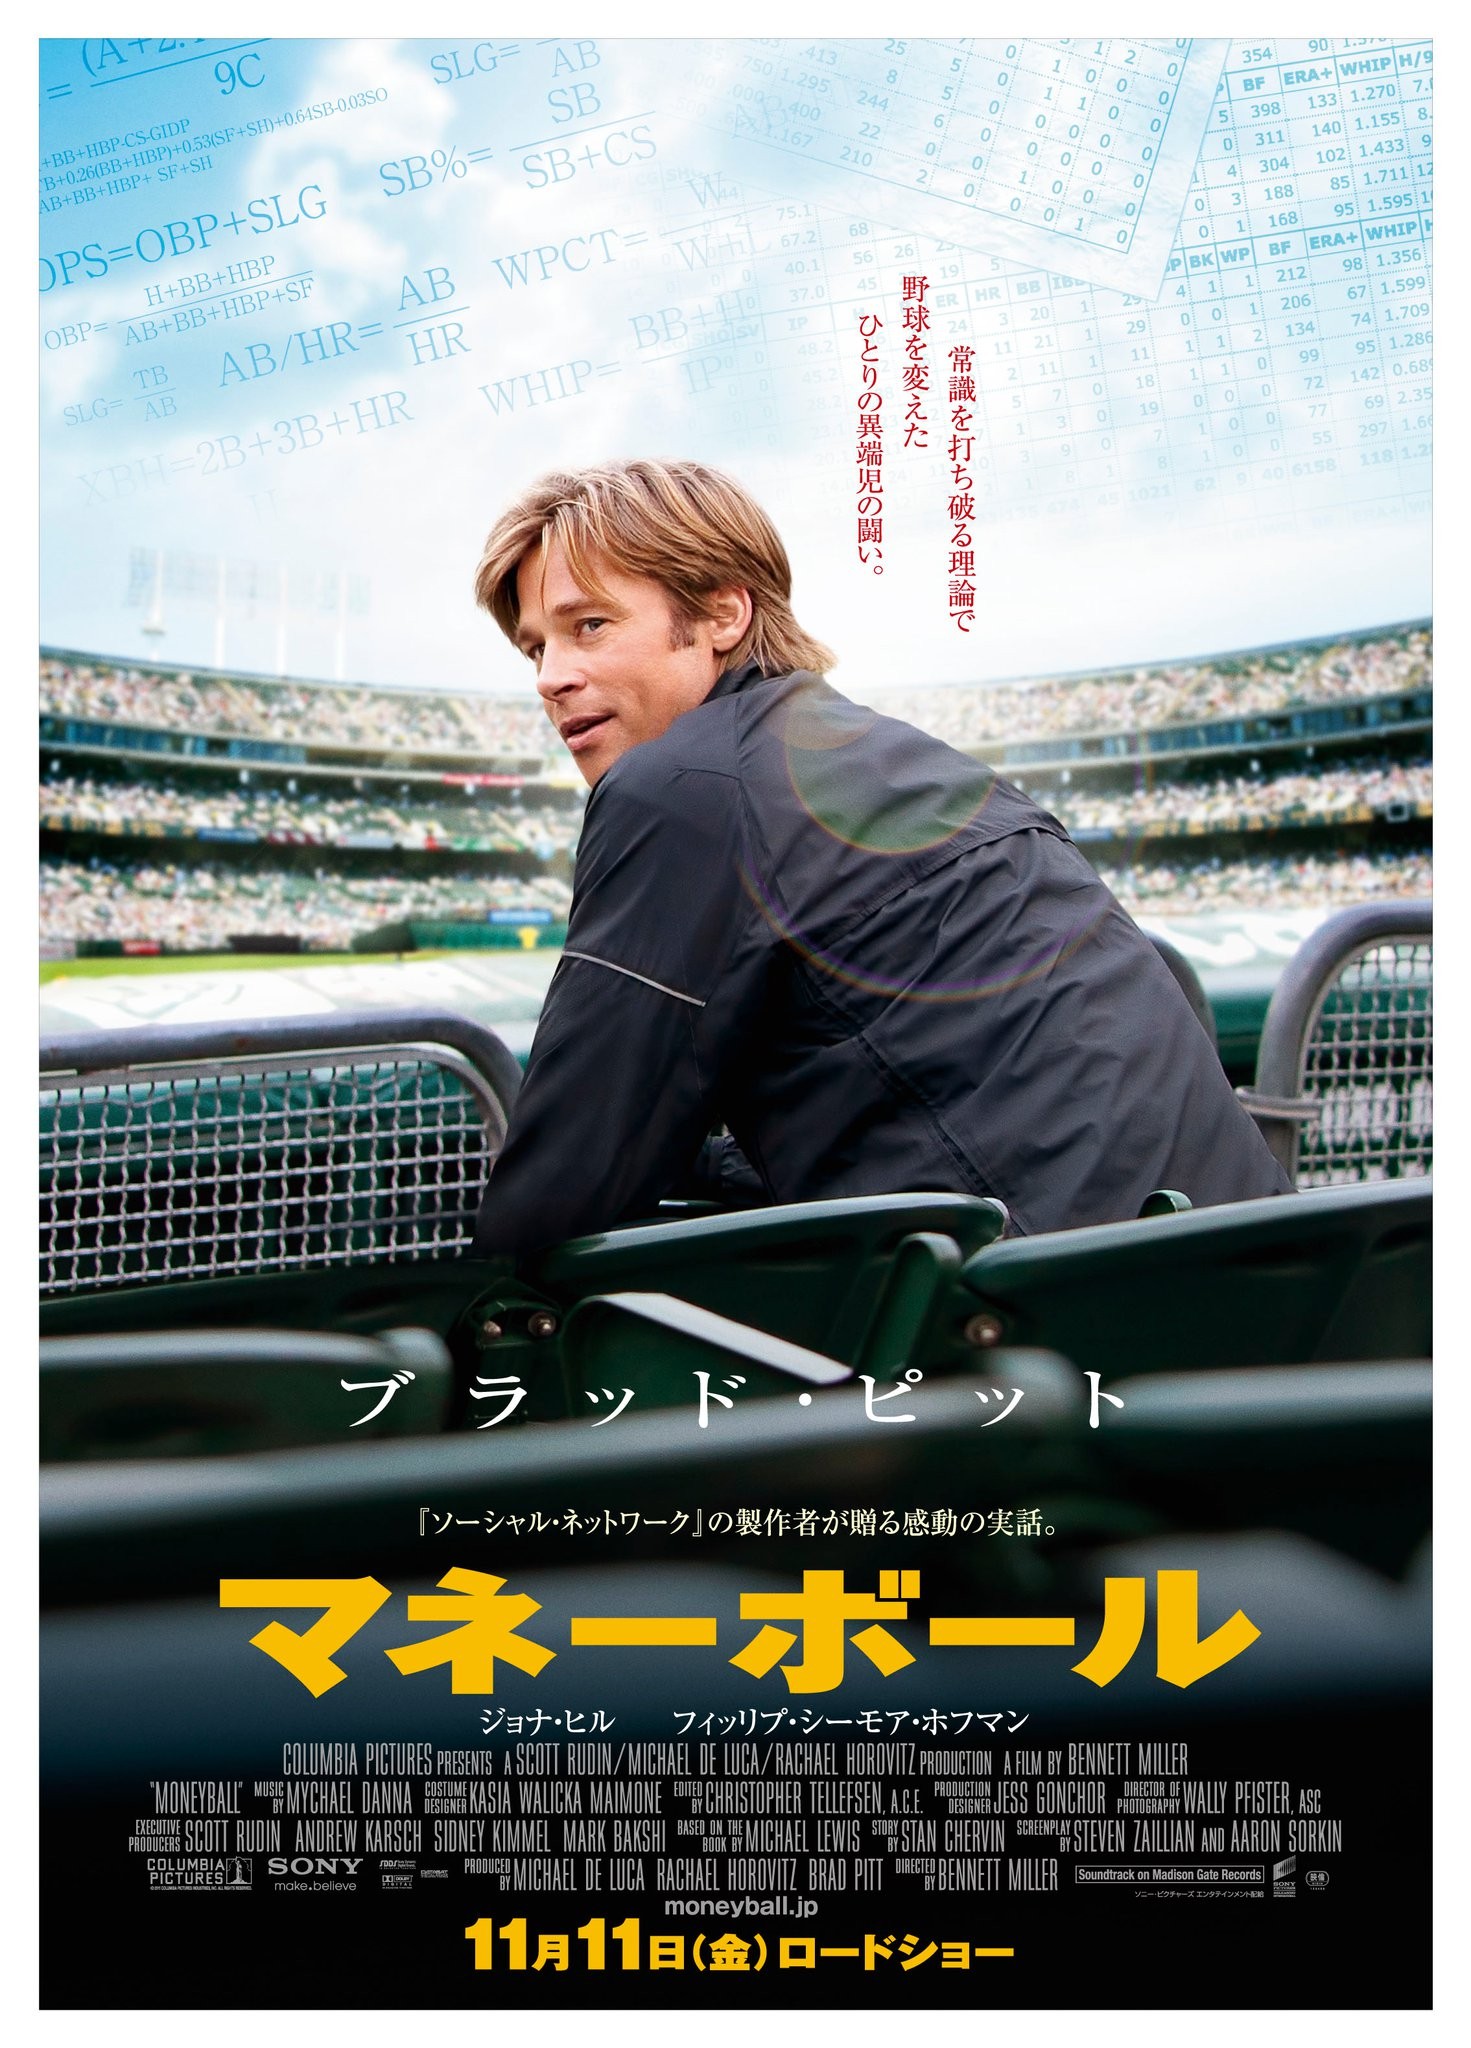 Mega Sized Movie Poster Image for Moneyball (#3 of 4)